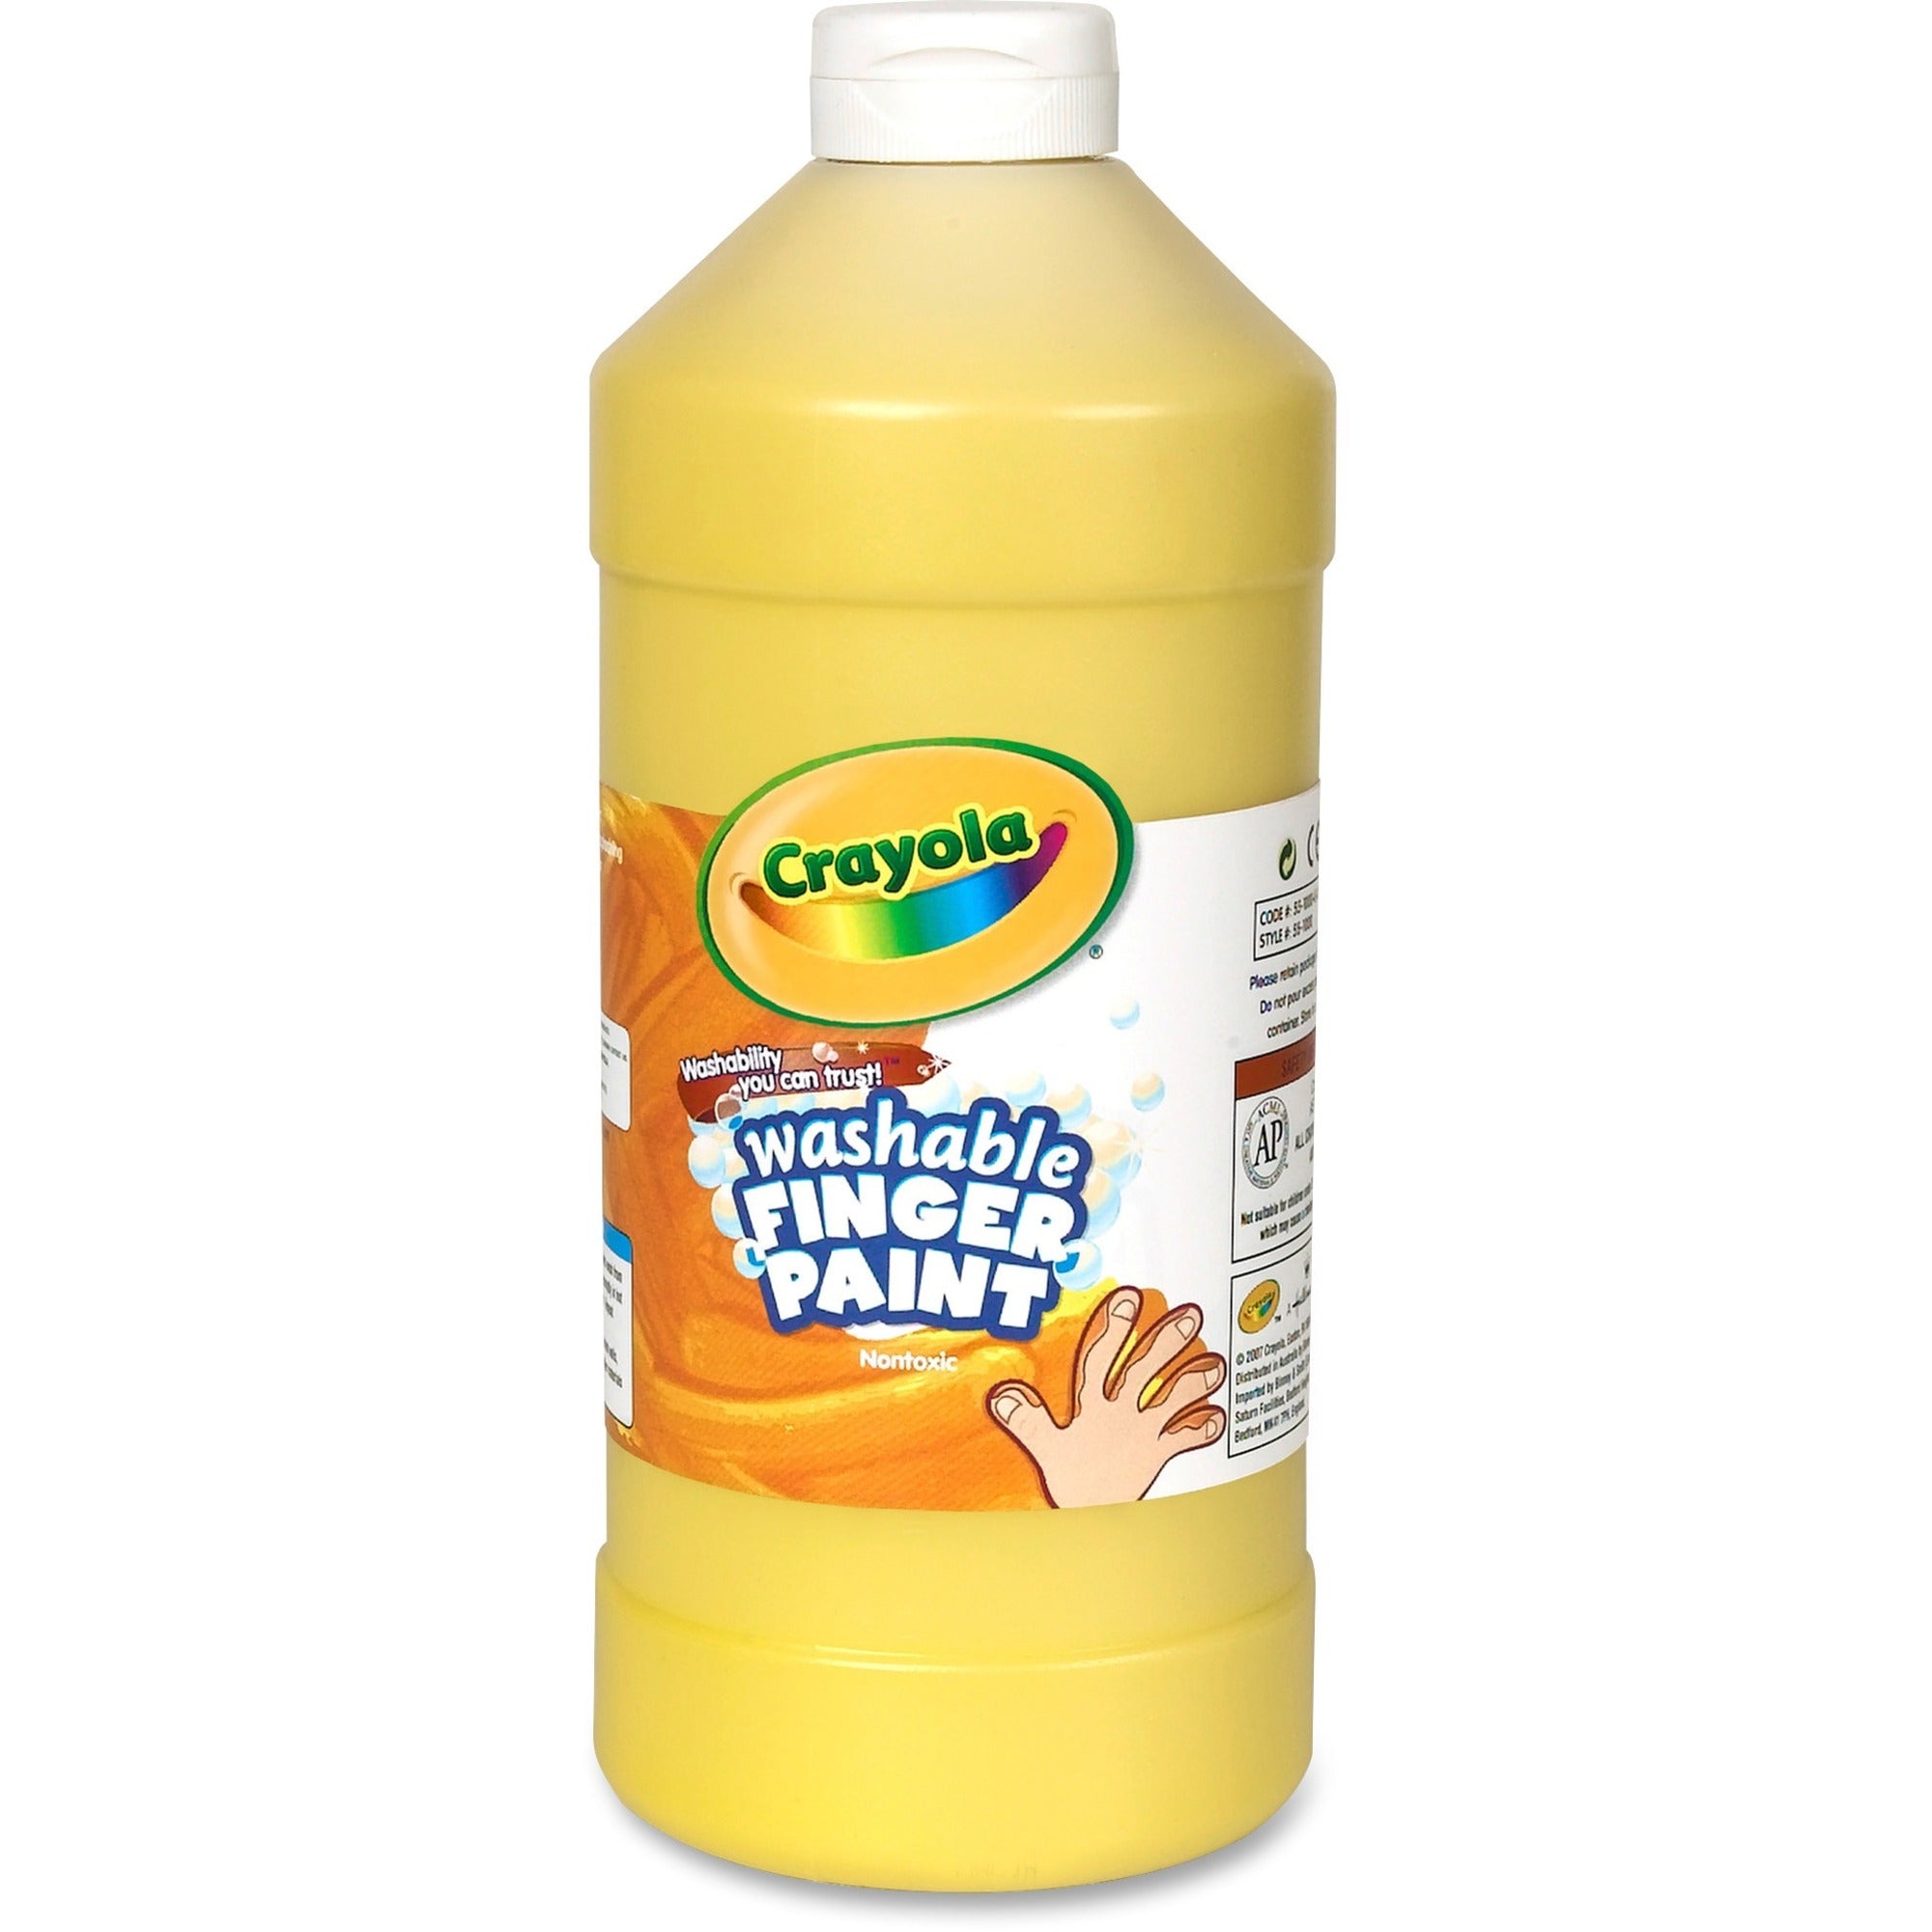 Crayola Washable Finger Paint - 2 lb - 1 Each - Yellow - 